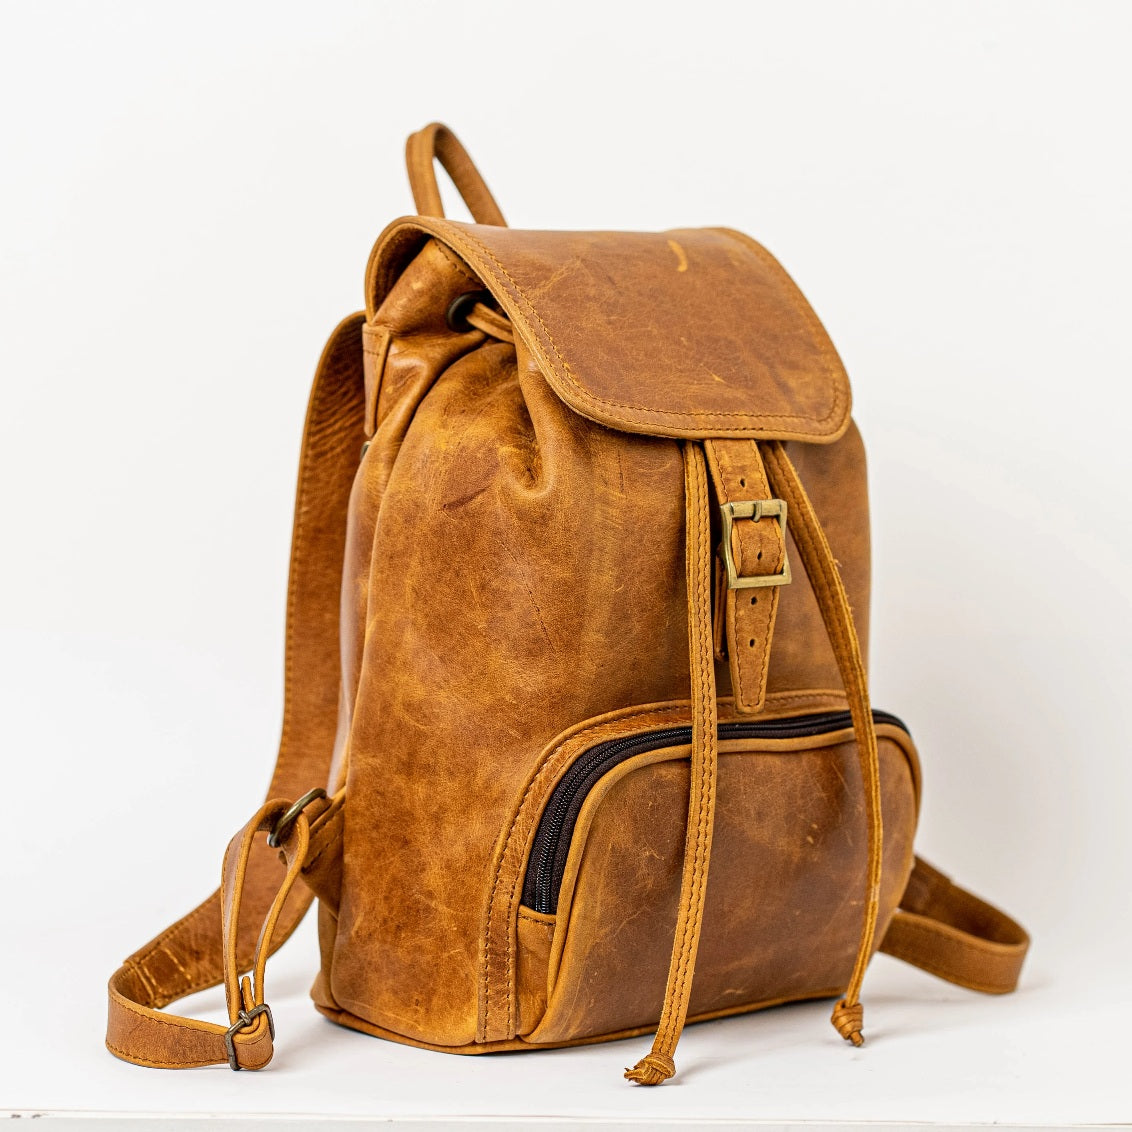 leather backpacks flap in toffee tan colour made by Cape Masai Leather